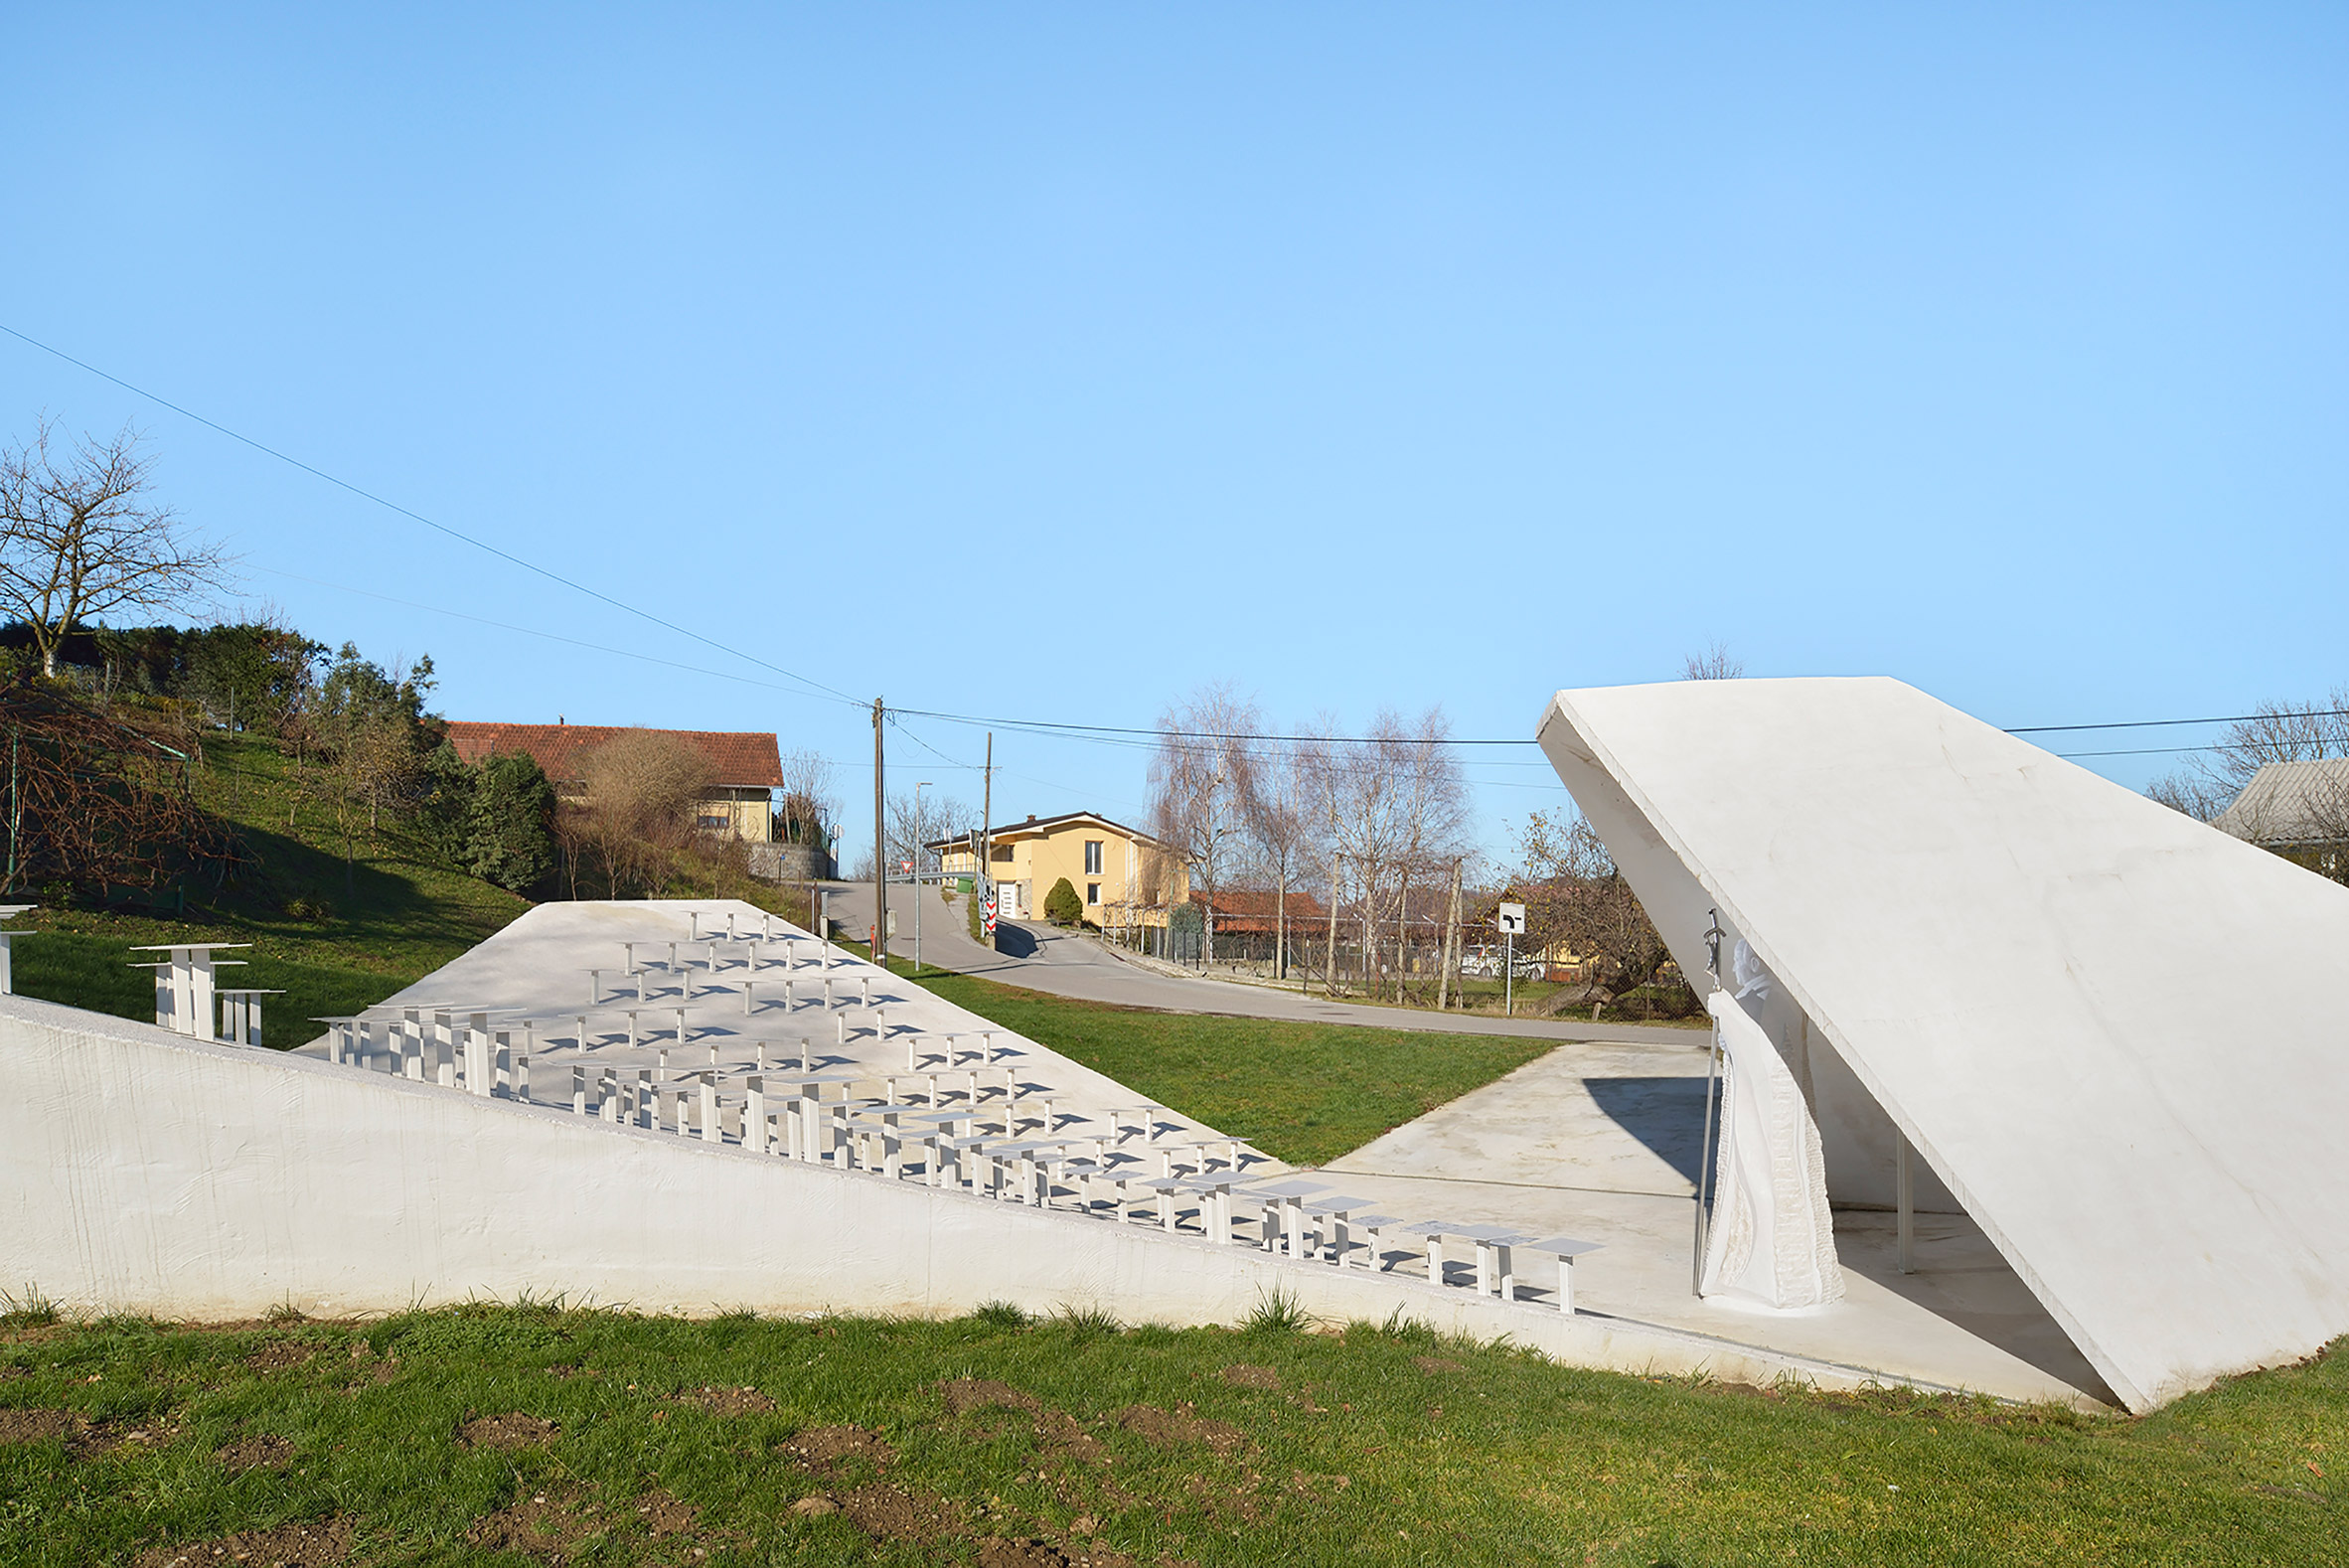 Sloping concrete volumes enclose social hub and chapel in a Slovenian village